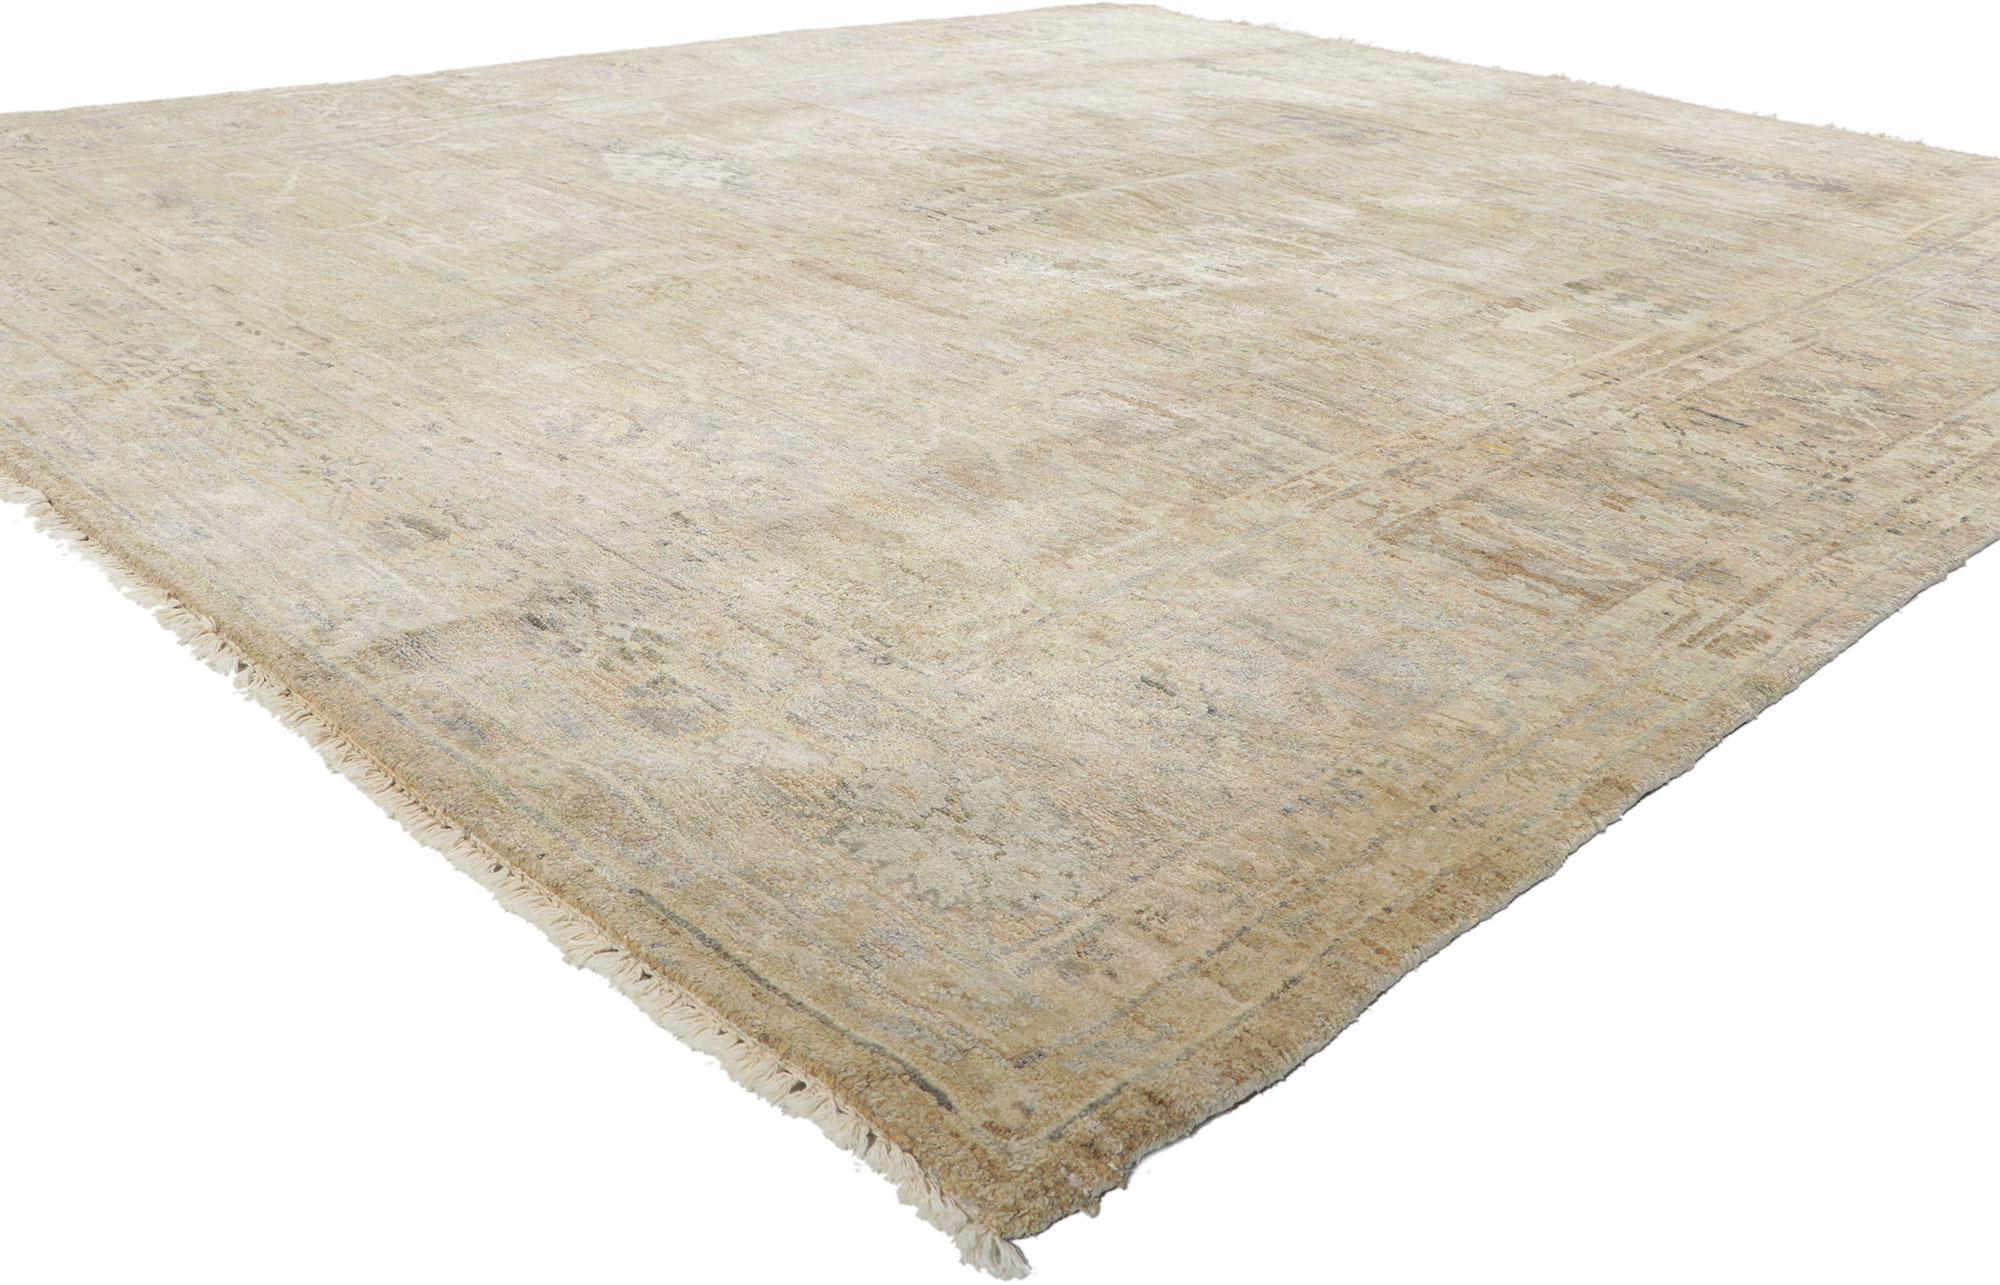 30365 New Vintage-Inspired Oushak Rug, 08'07 x 09'10. Emanating vintage charm with incredible detail and texture, this wool and silk Oushak rug is a captivating vision of woven beauty. The faded botanical pattern and soft earth-tone colors woven